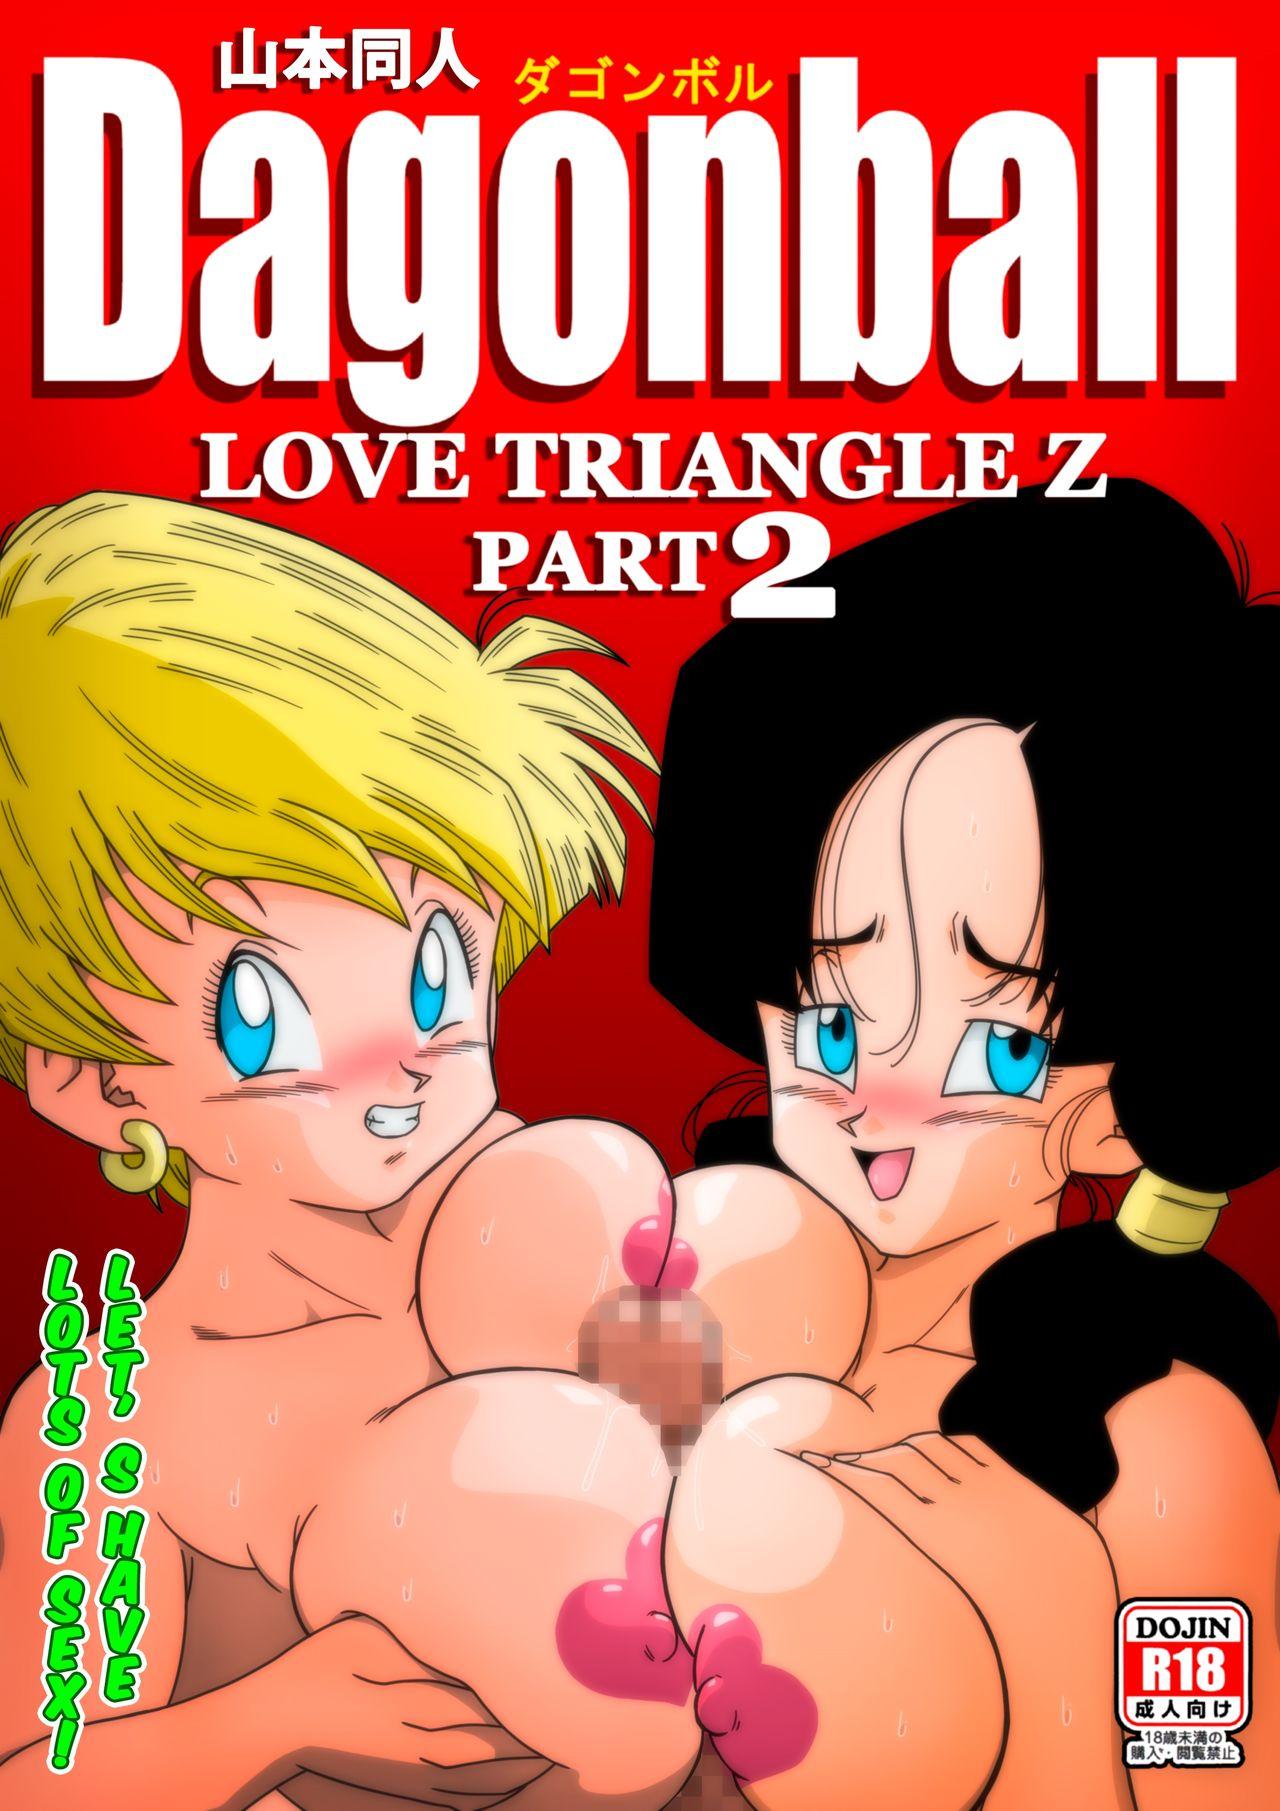 amateur sex dragon ball pic from sex video